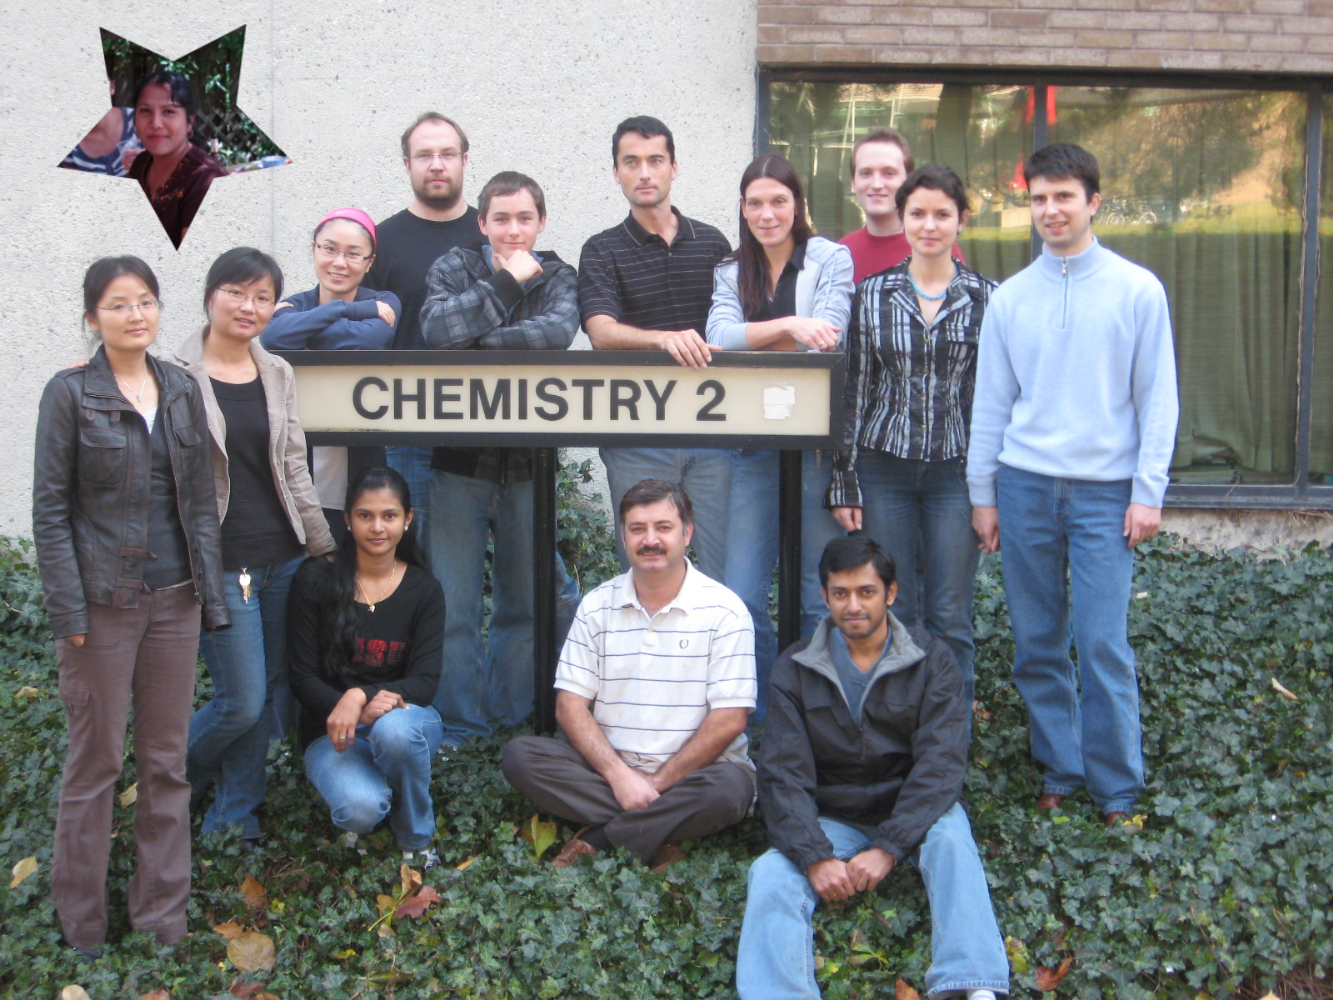 November 2008: group photo! From left to right, front: Annie, Yanjie, Maya, Wiqar, Raj. From left to right, back: Tingting, Chris, Sascha (as guest), Holger, Katja, Bryan, Mariya, Michael.